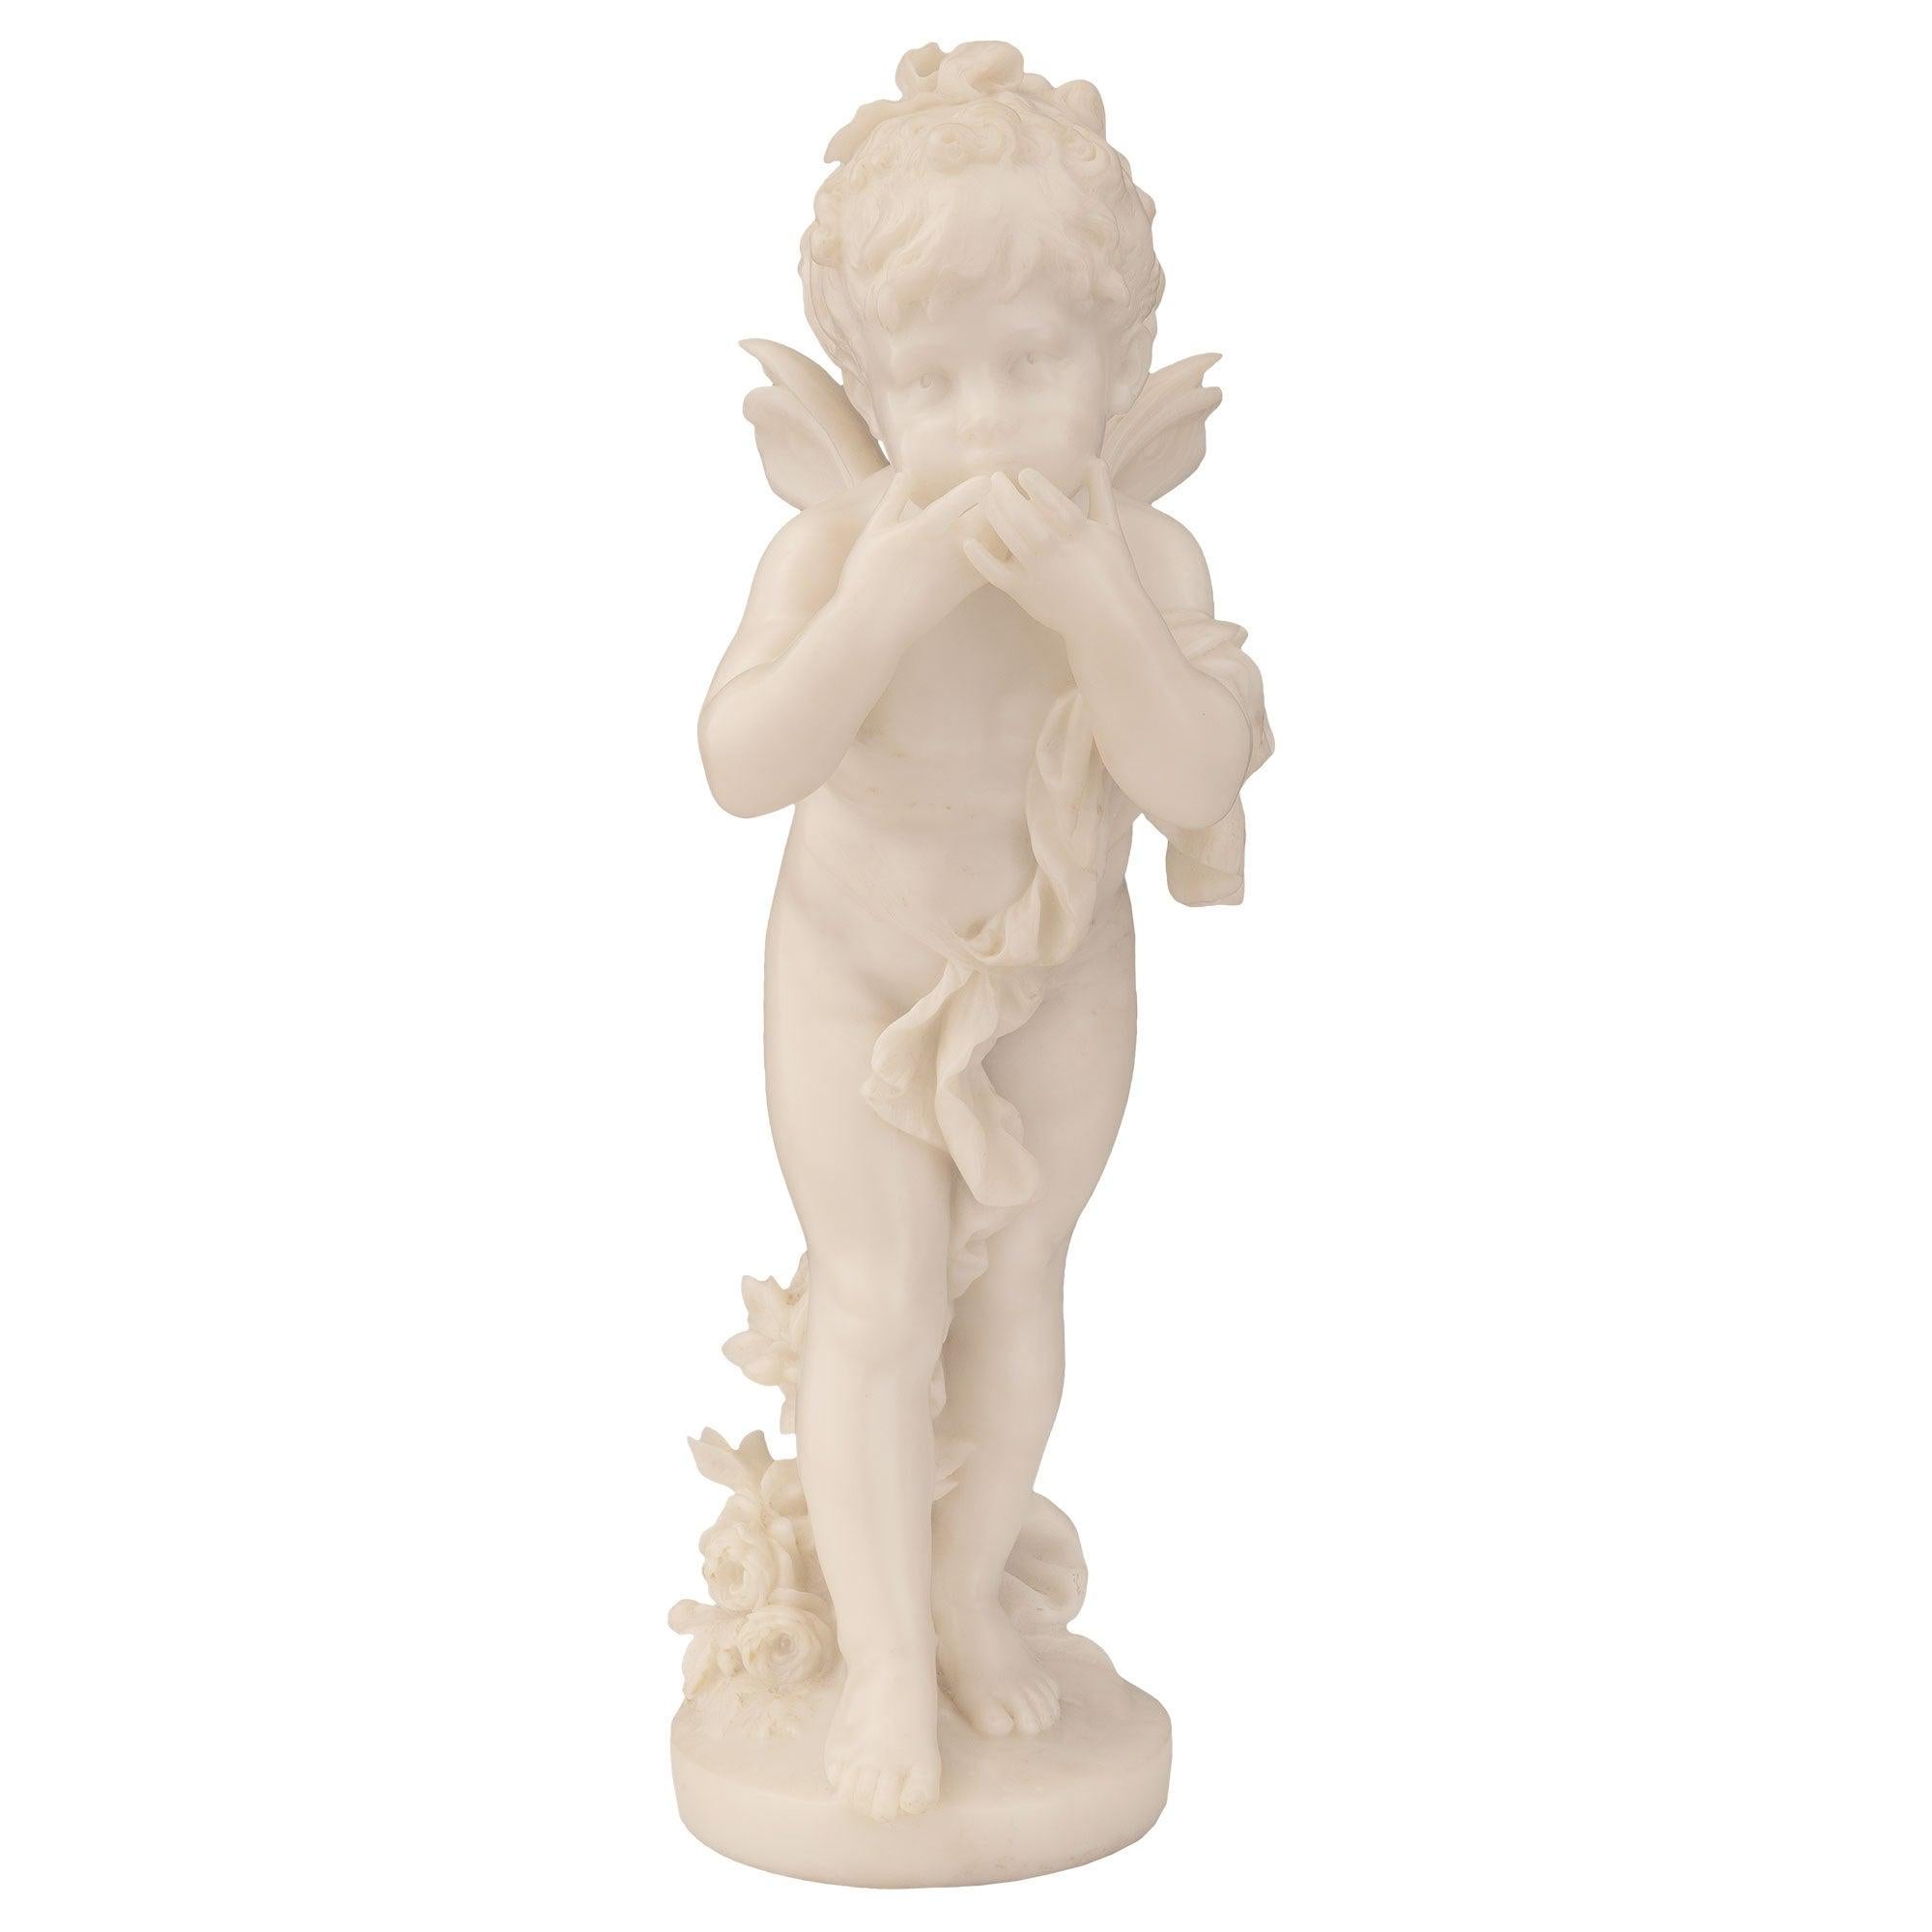 Italian Mid-19th Century White Carrara Marble Statue of Winged Girl For Sale